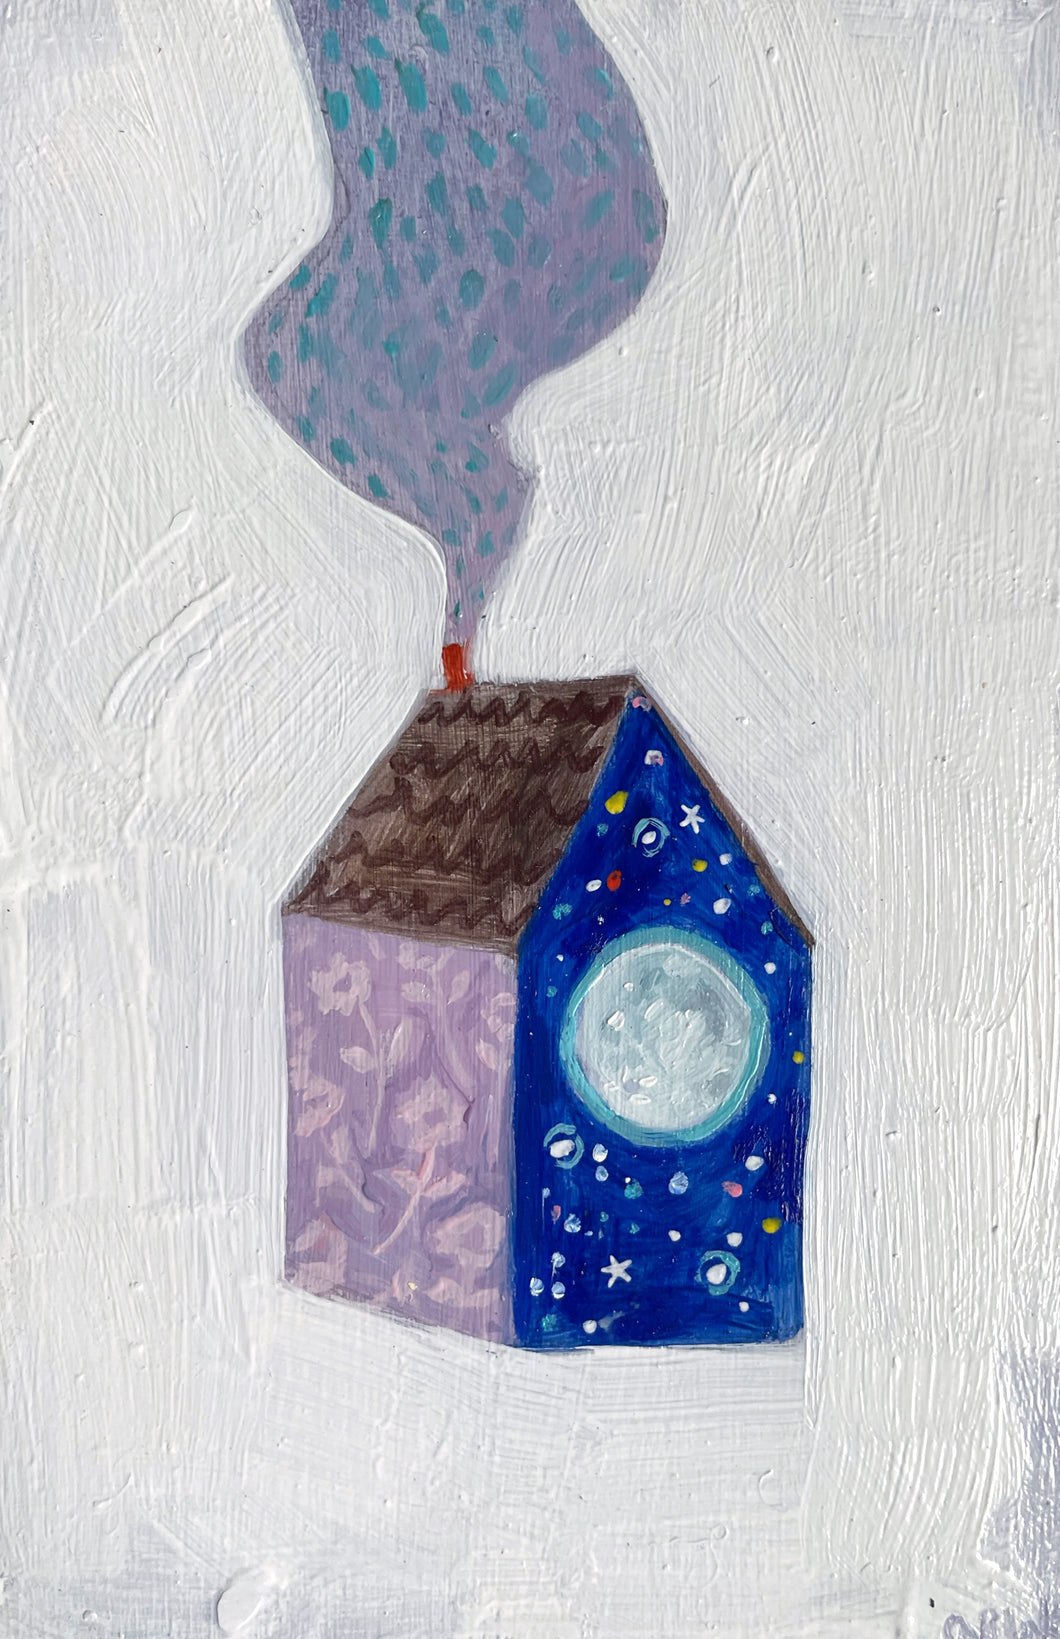 A home made of moonlight and peace